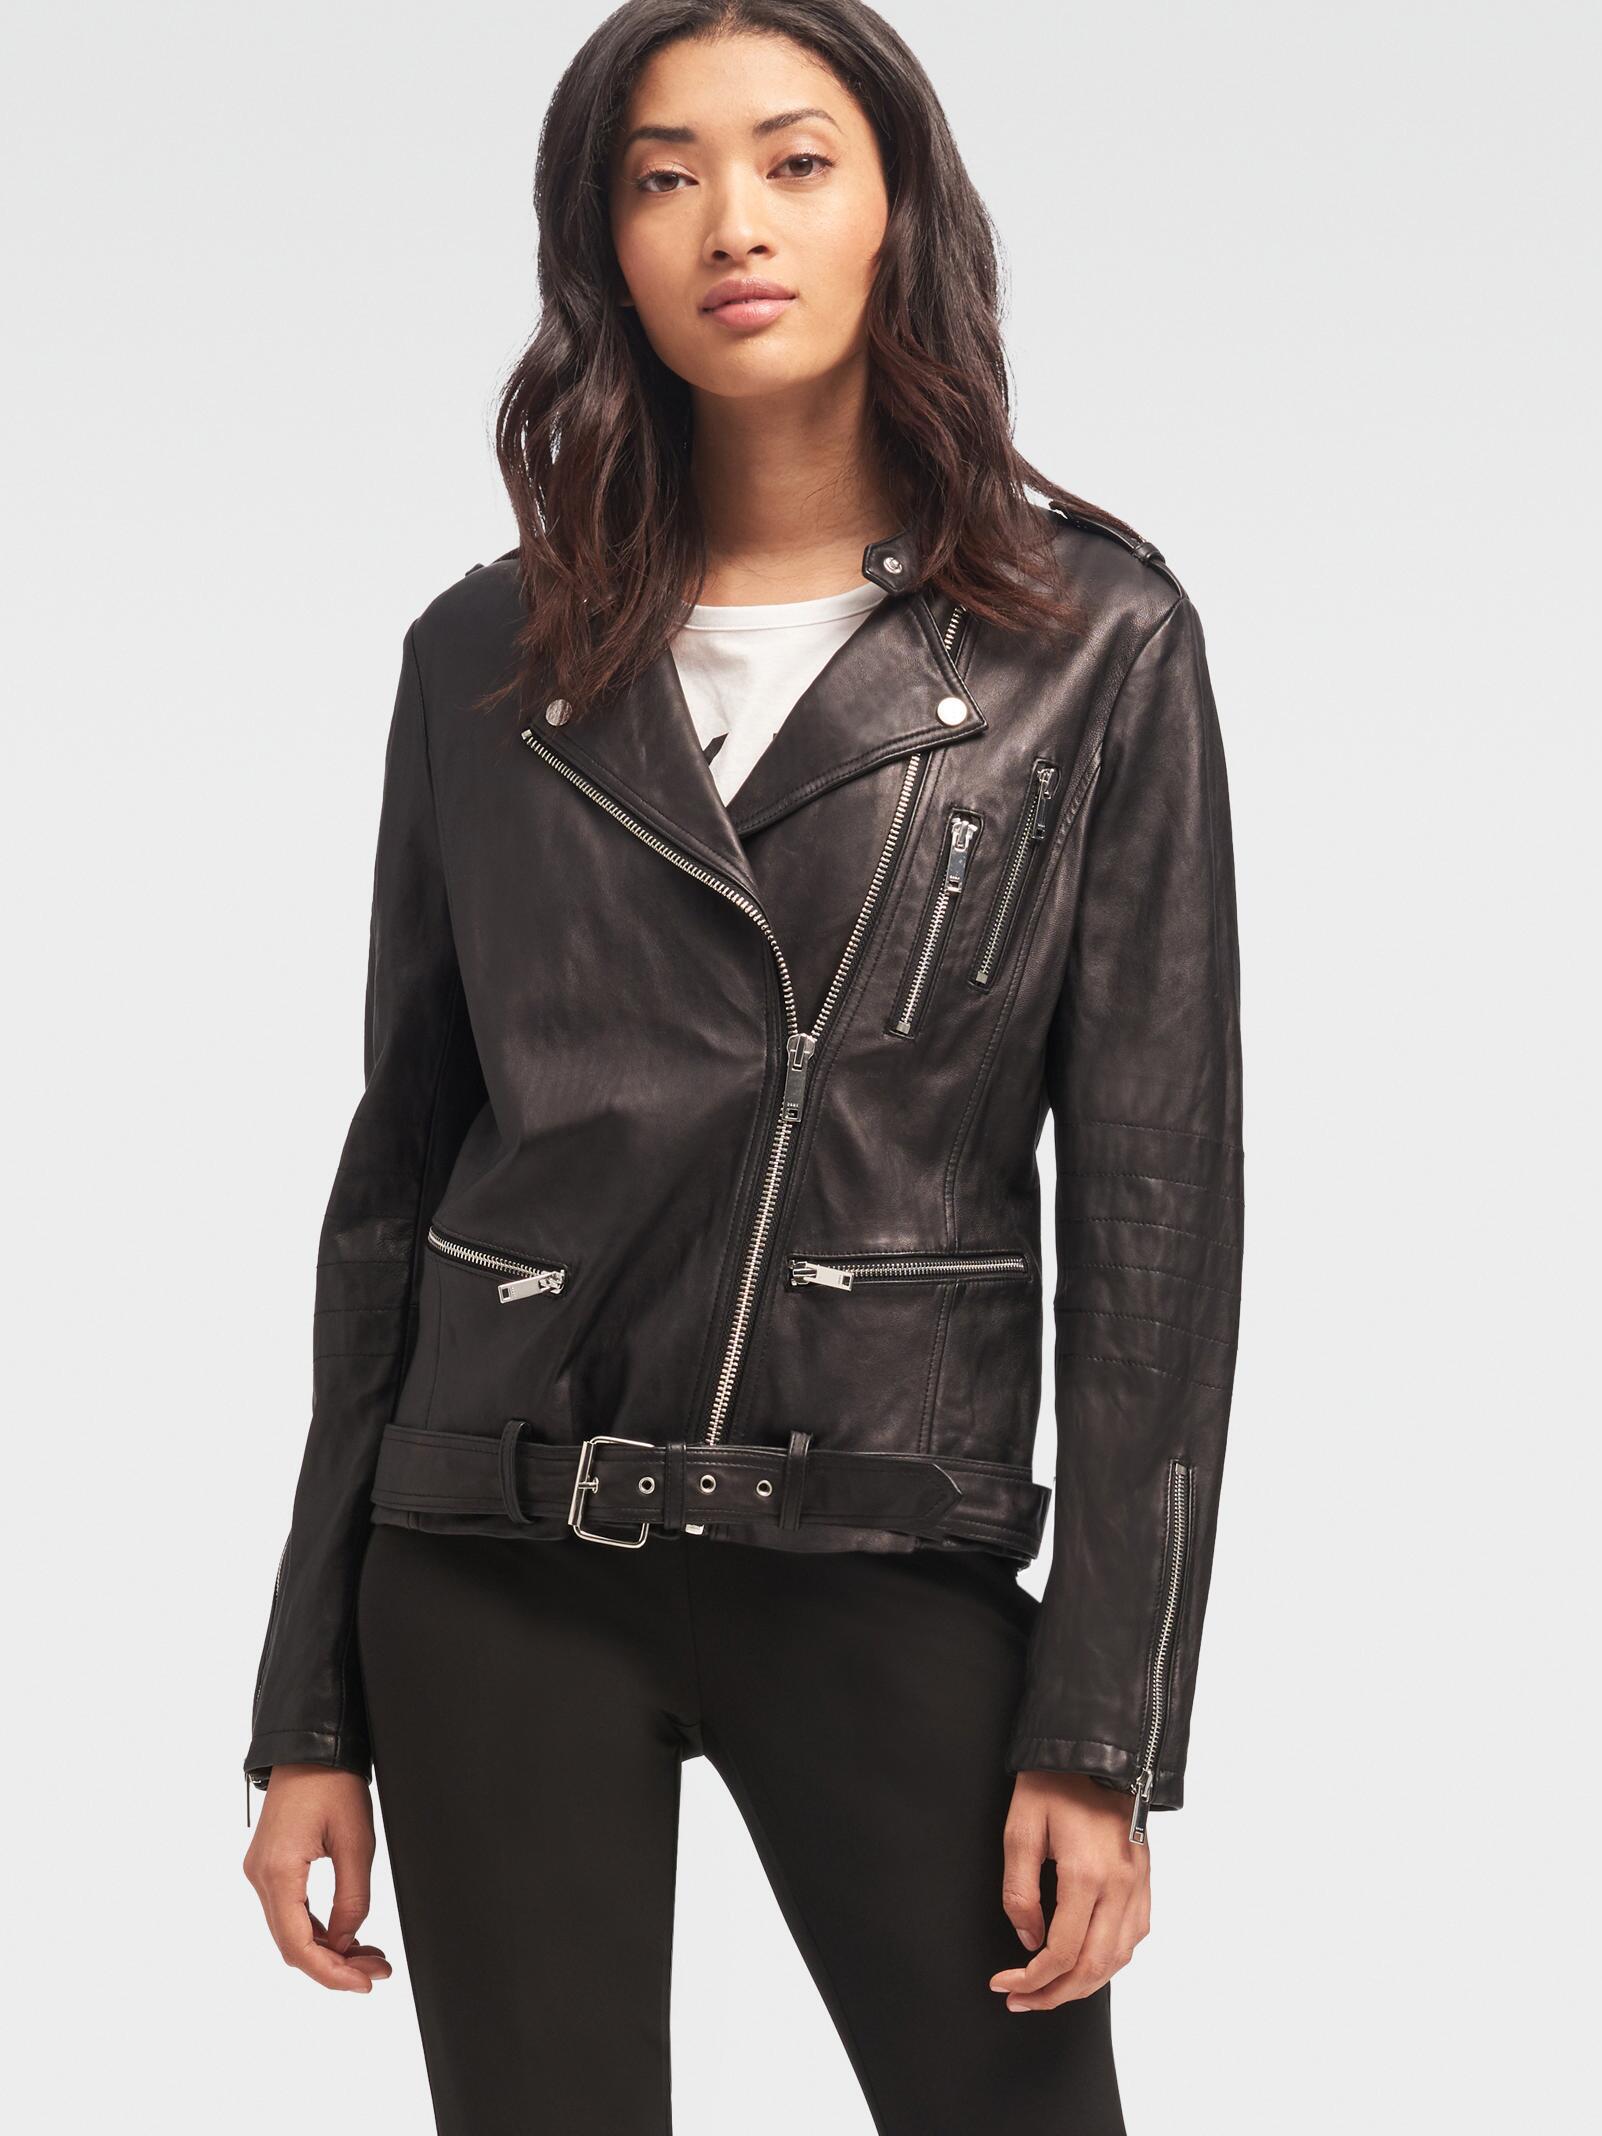 DKNY Oversized Leather Motorcycle Jacket in Black - Lyst